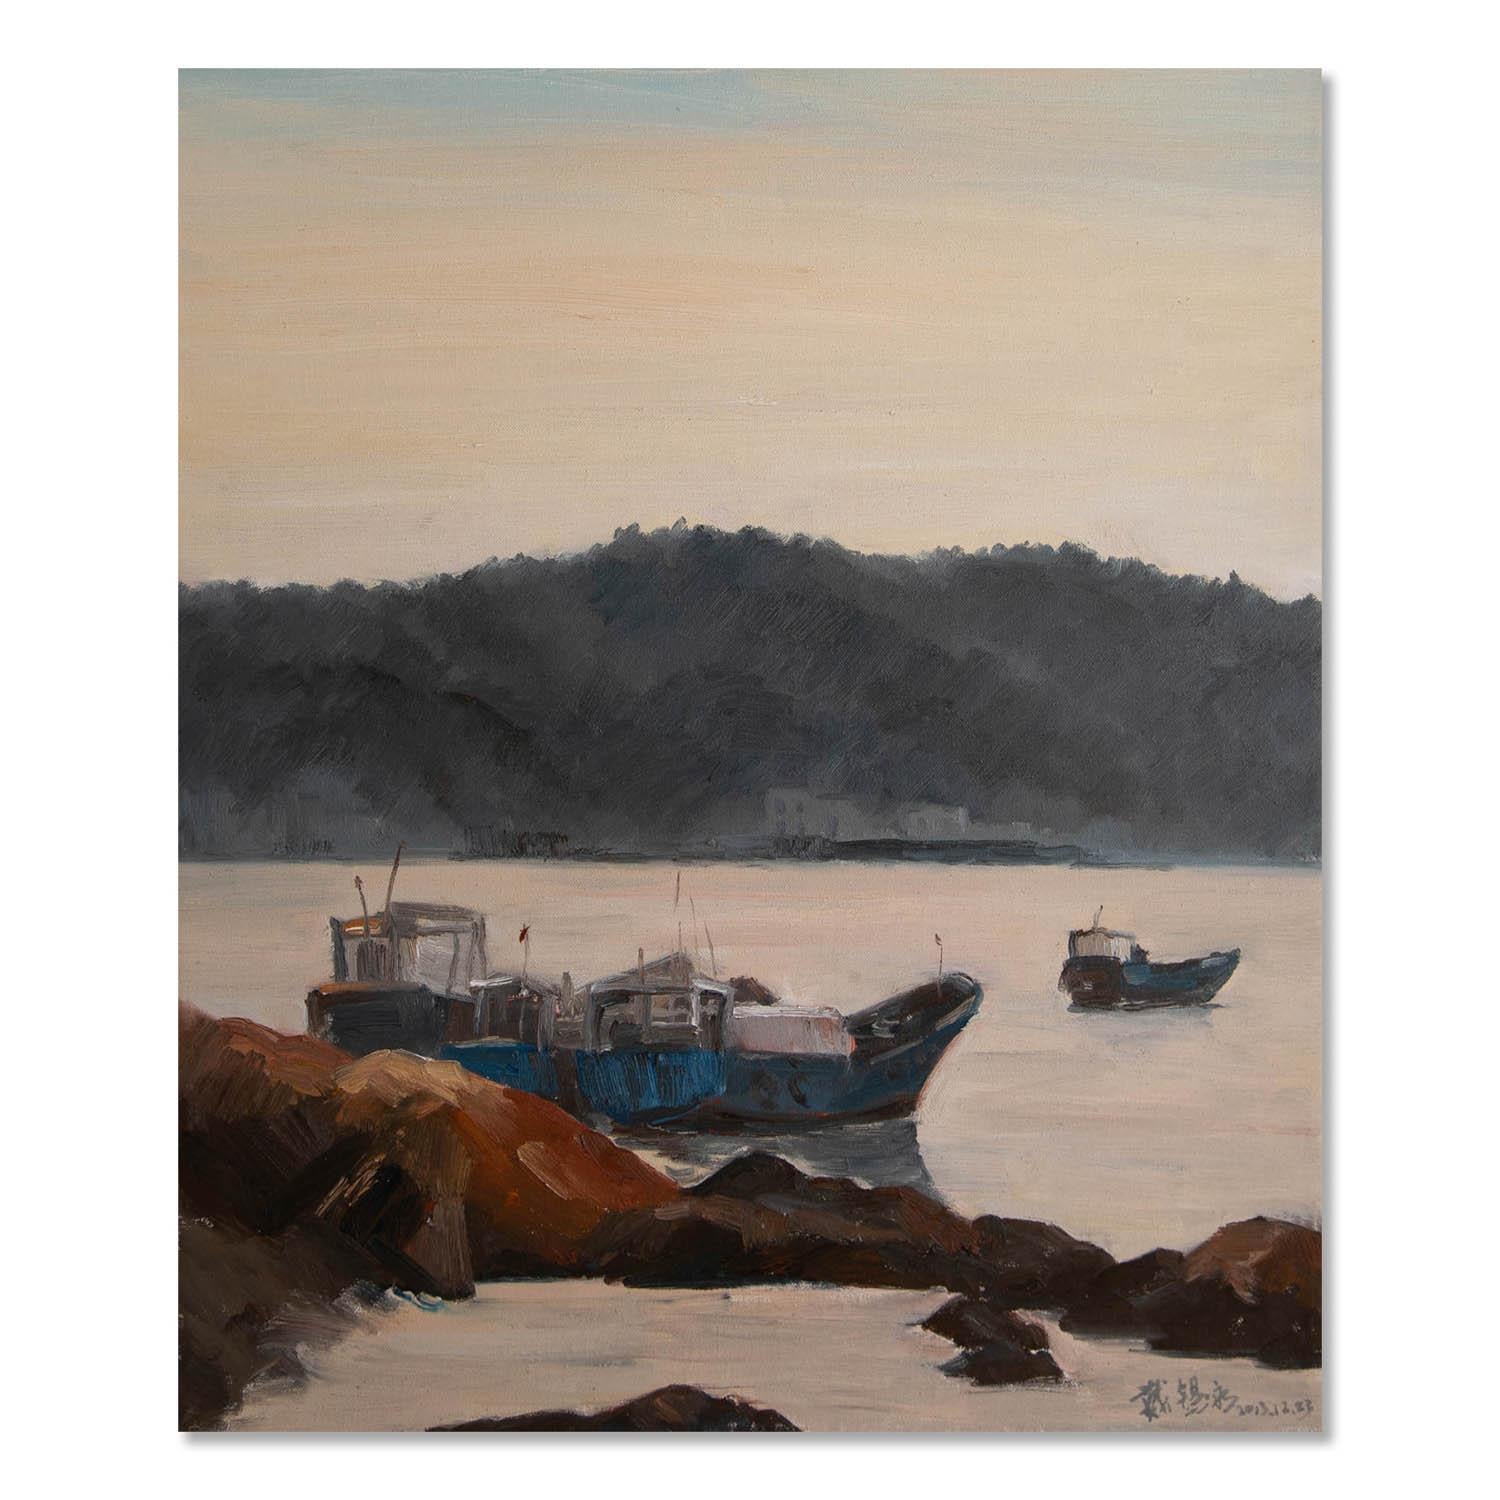  Title: Seaside
 Medium: Oil on canvas
 Size: 23.5 x 19.5 inches
 Frame: Framing options available!
 Condition: The painting appears to be in excellent condition.
 
 Year: 2013
 Artist: Xiyong Dai
 Signature: Signed
 Signature Location: Lower right
